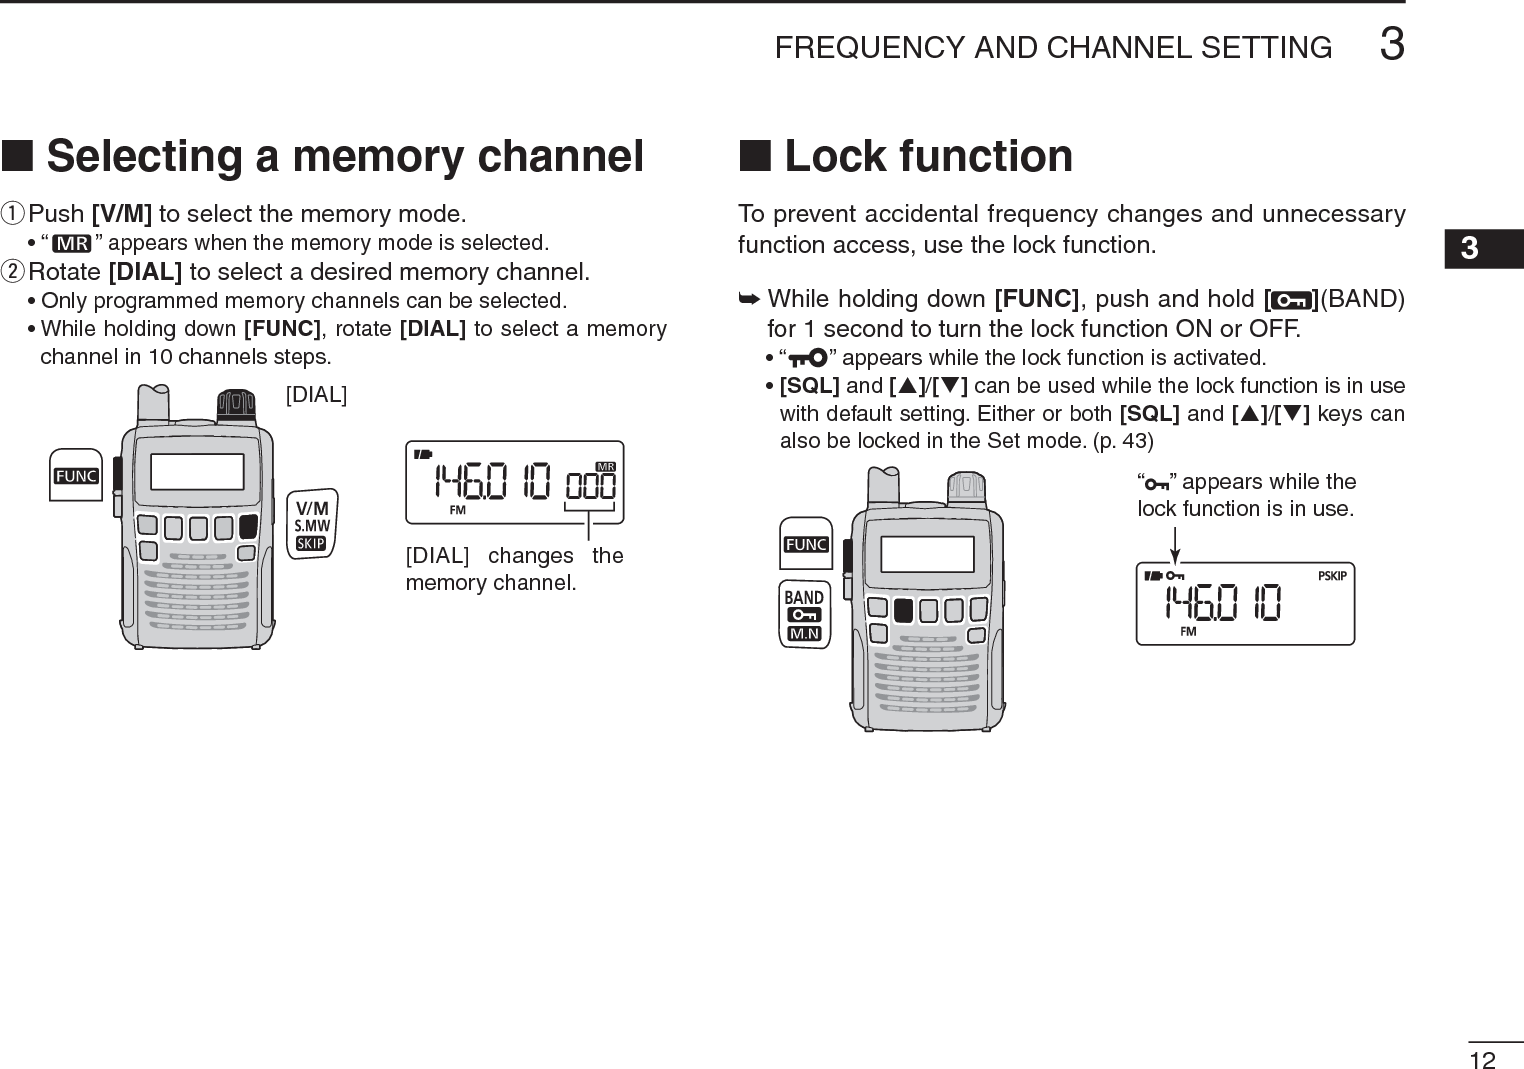 123FREQUENCY AND CHANNEL SETTING 3N Selecting a memory channelqPush [V/M] to select the memory mode.• “ ” appears when the memory mode is selected.wRotate [DIAL] to select a desired memory channel.• Only programmed memory channels can be selected.• While holding down [FUNC], rotate [DIAL] to select a memory channel in 10 channels steps.[DIAL][DIAL] changes thememory channel.N Lock functionTo prevent accidental frequency changes and unnecessary function access, use the lock function. ±While holding down [FUNC], push and hold [ ](BAND)for 1 second to turn the lock function ON or OFF.• “ ” appears while the lock function is activated.•[SQL] and [S]/[T] can be used while the lock function is in use with default setting. Either or both [SQL] and [S]/[T] keys can also be locked in the Set mode. (p. 43)“ ” appears while the lock function is in use.